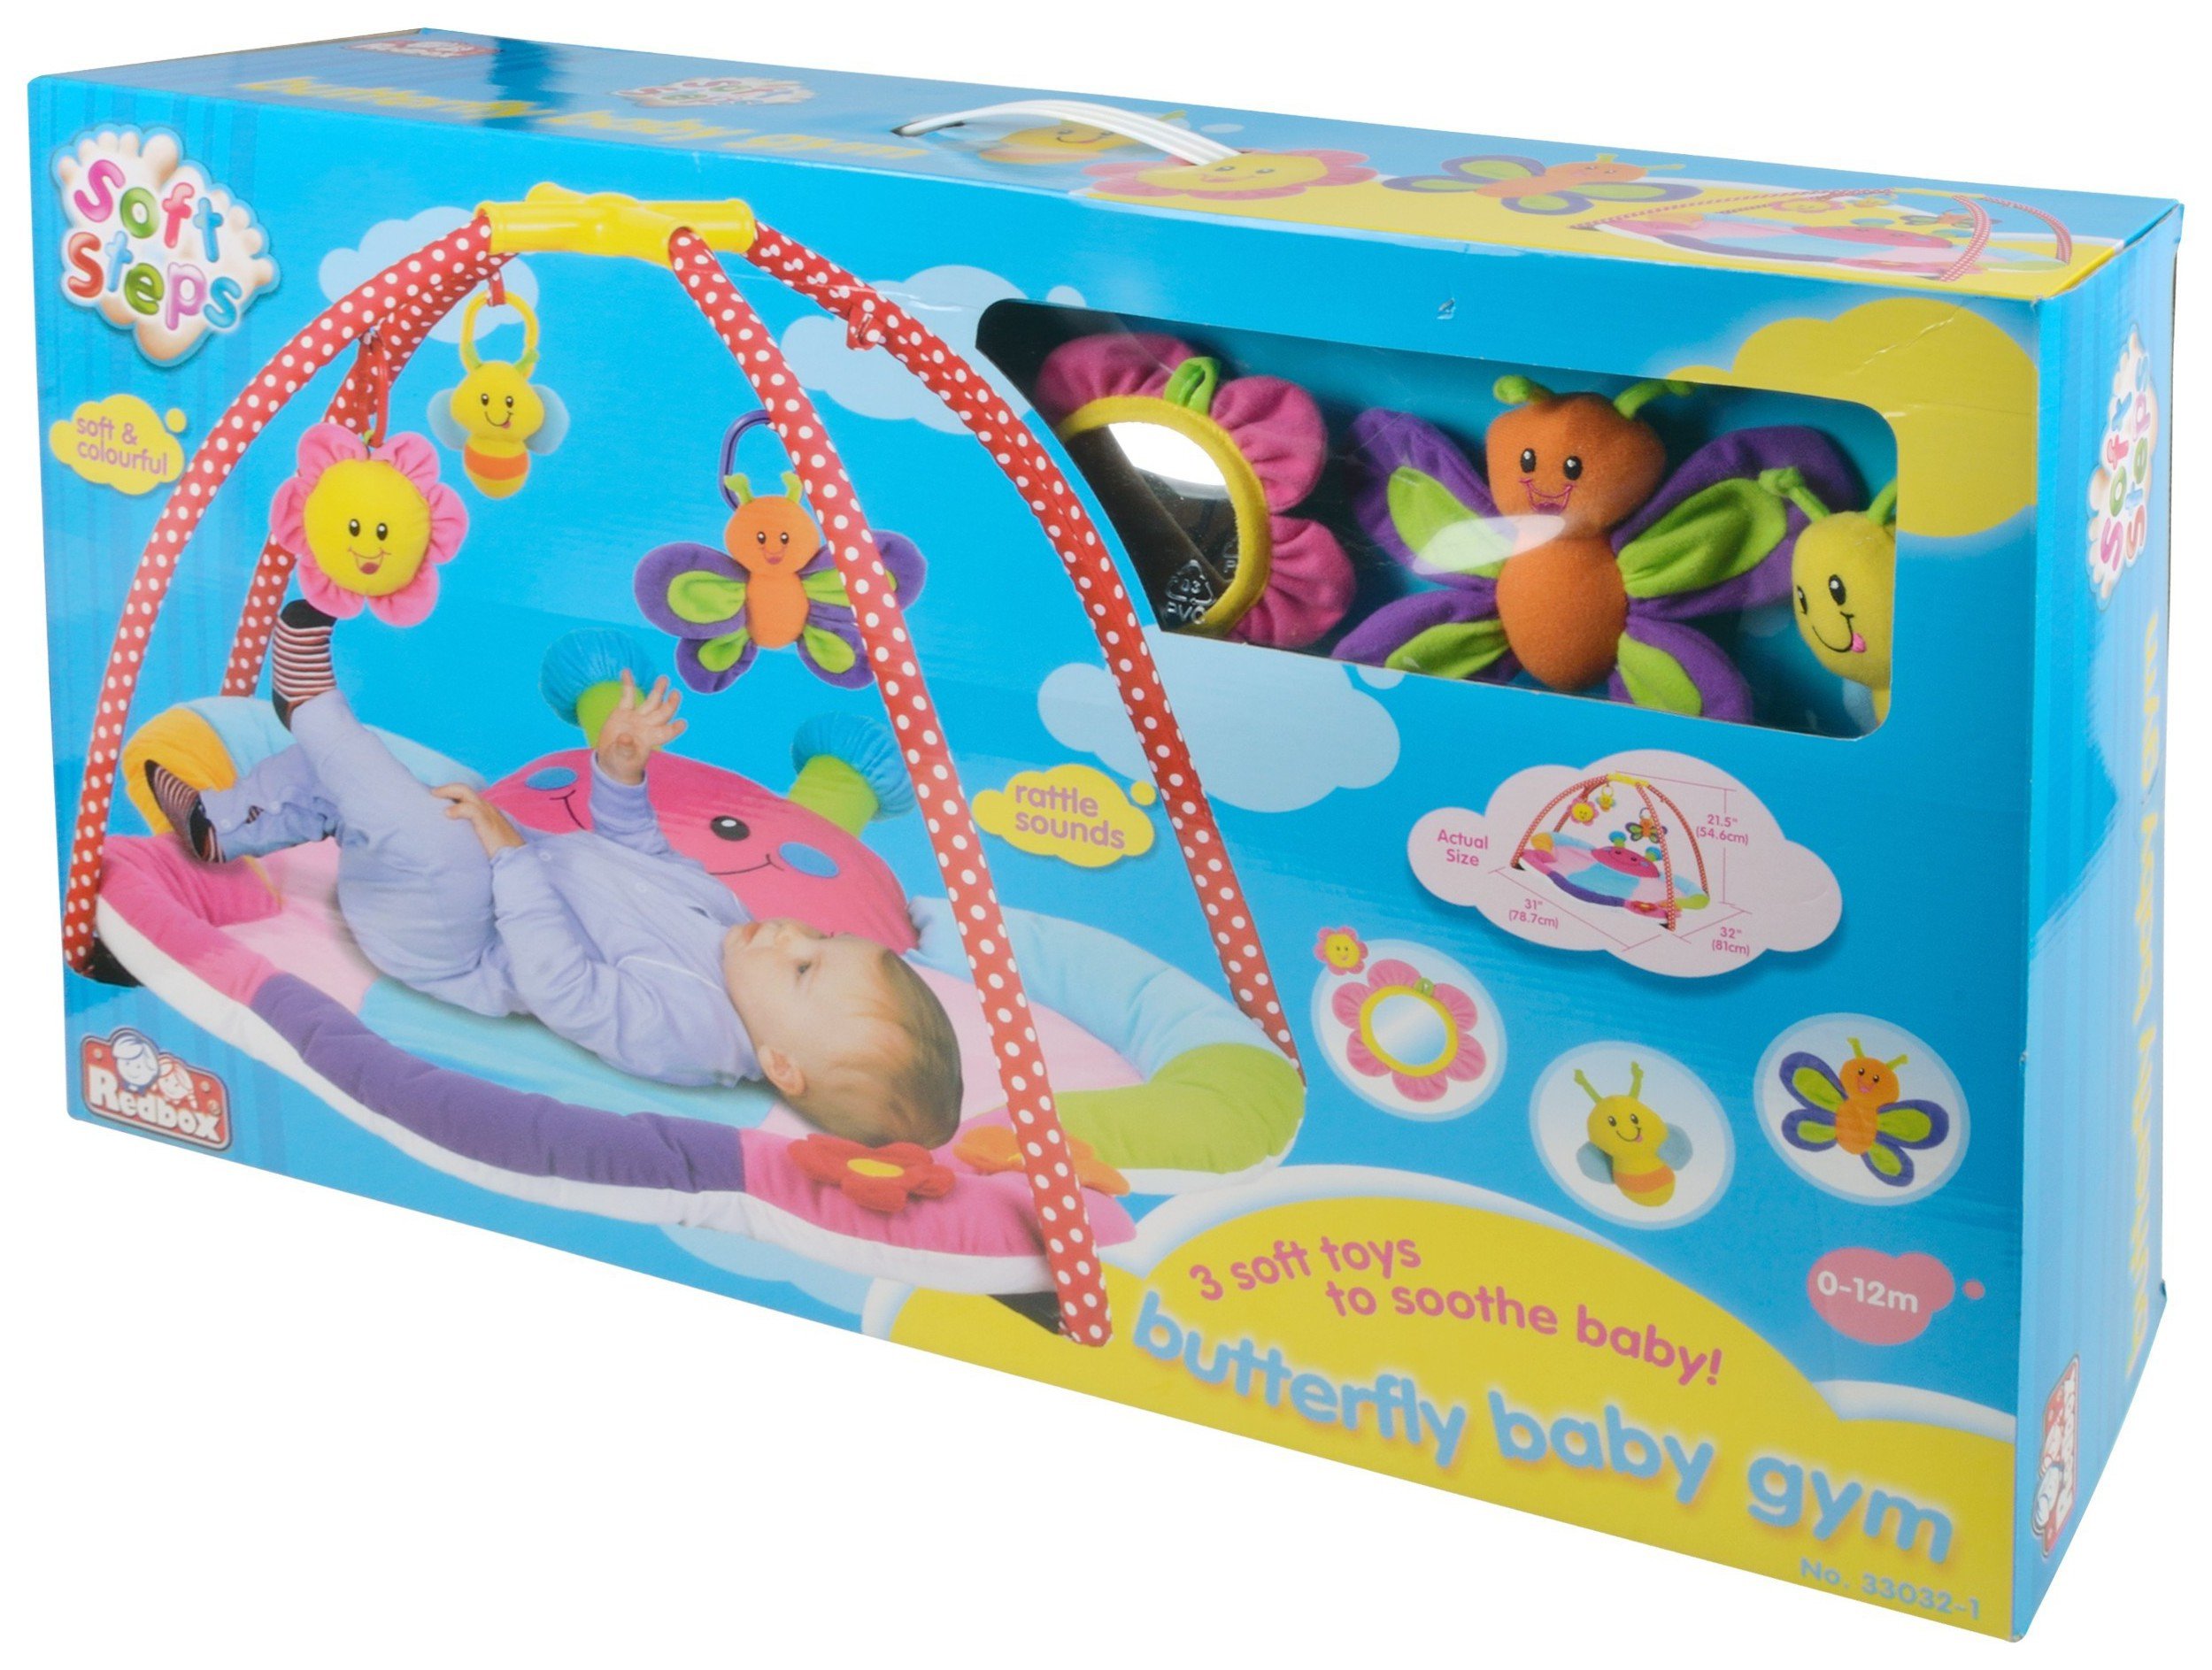 Butterfly Play Gym - Richmond Toys